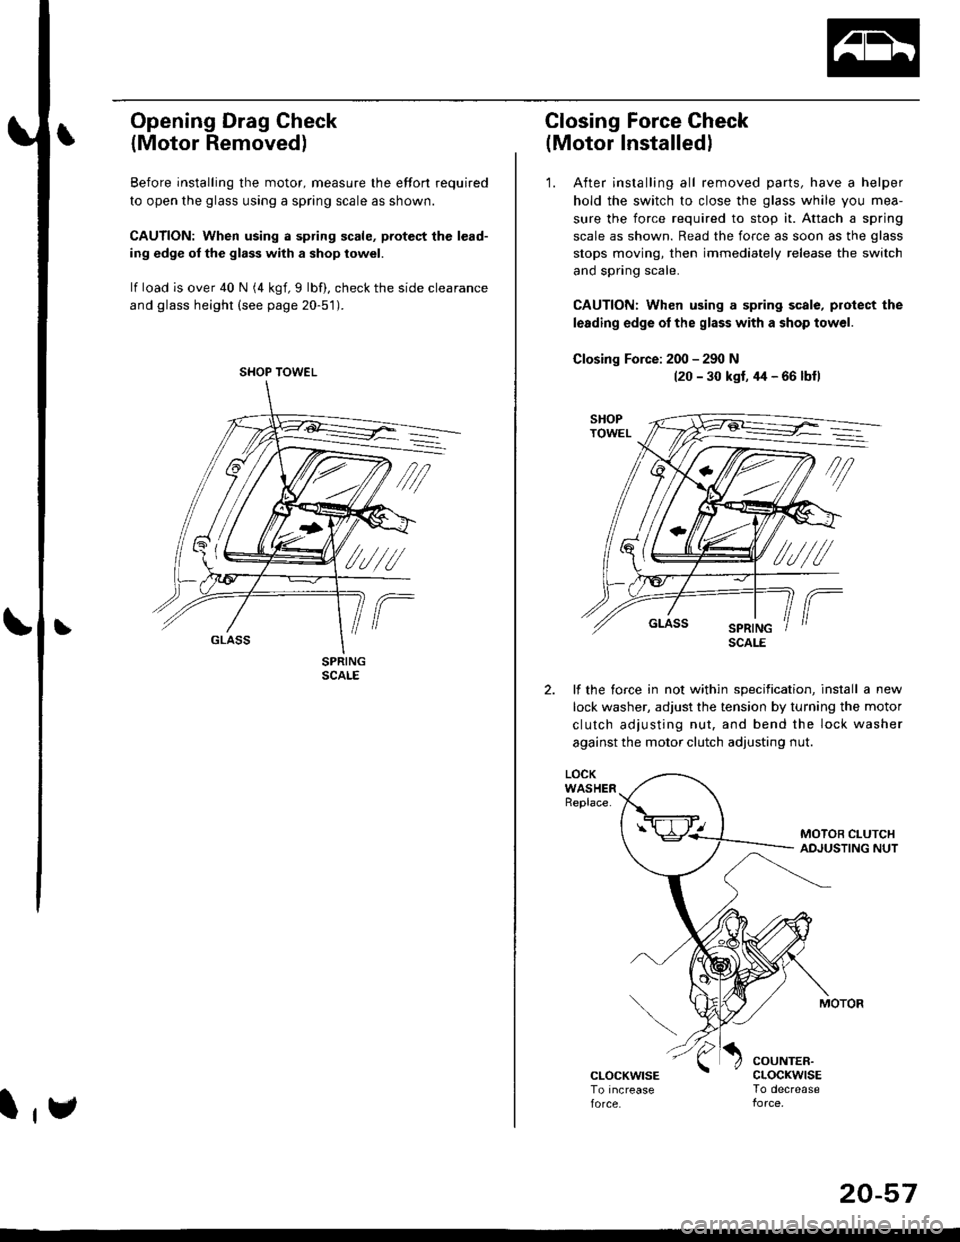 HONDA CIVIC 1996 6.G Owners Guide Opening Drag Check
{Motor Removed)
Before installing the motor, measure lhe effort required
to open the glass using a spring scale as shown.
CAUTION: When using a spring scale, pfotest the lead-
ing e